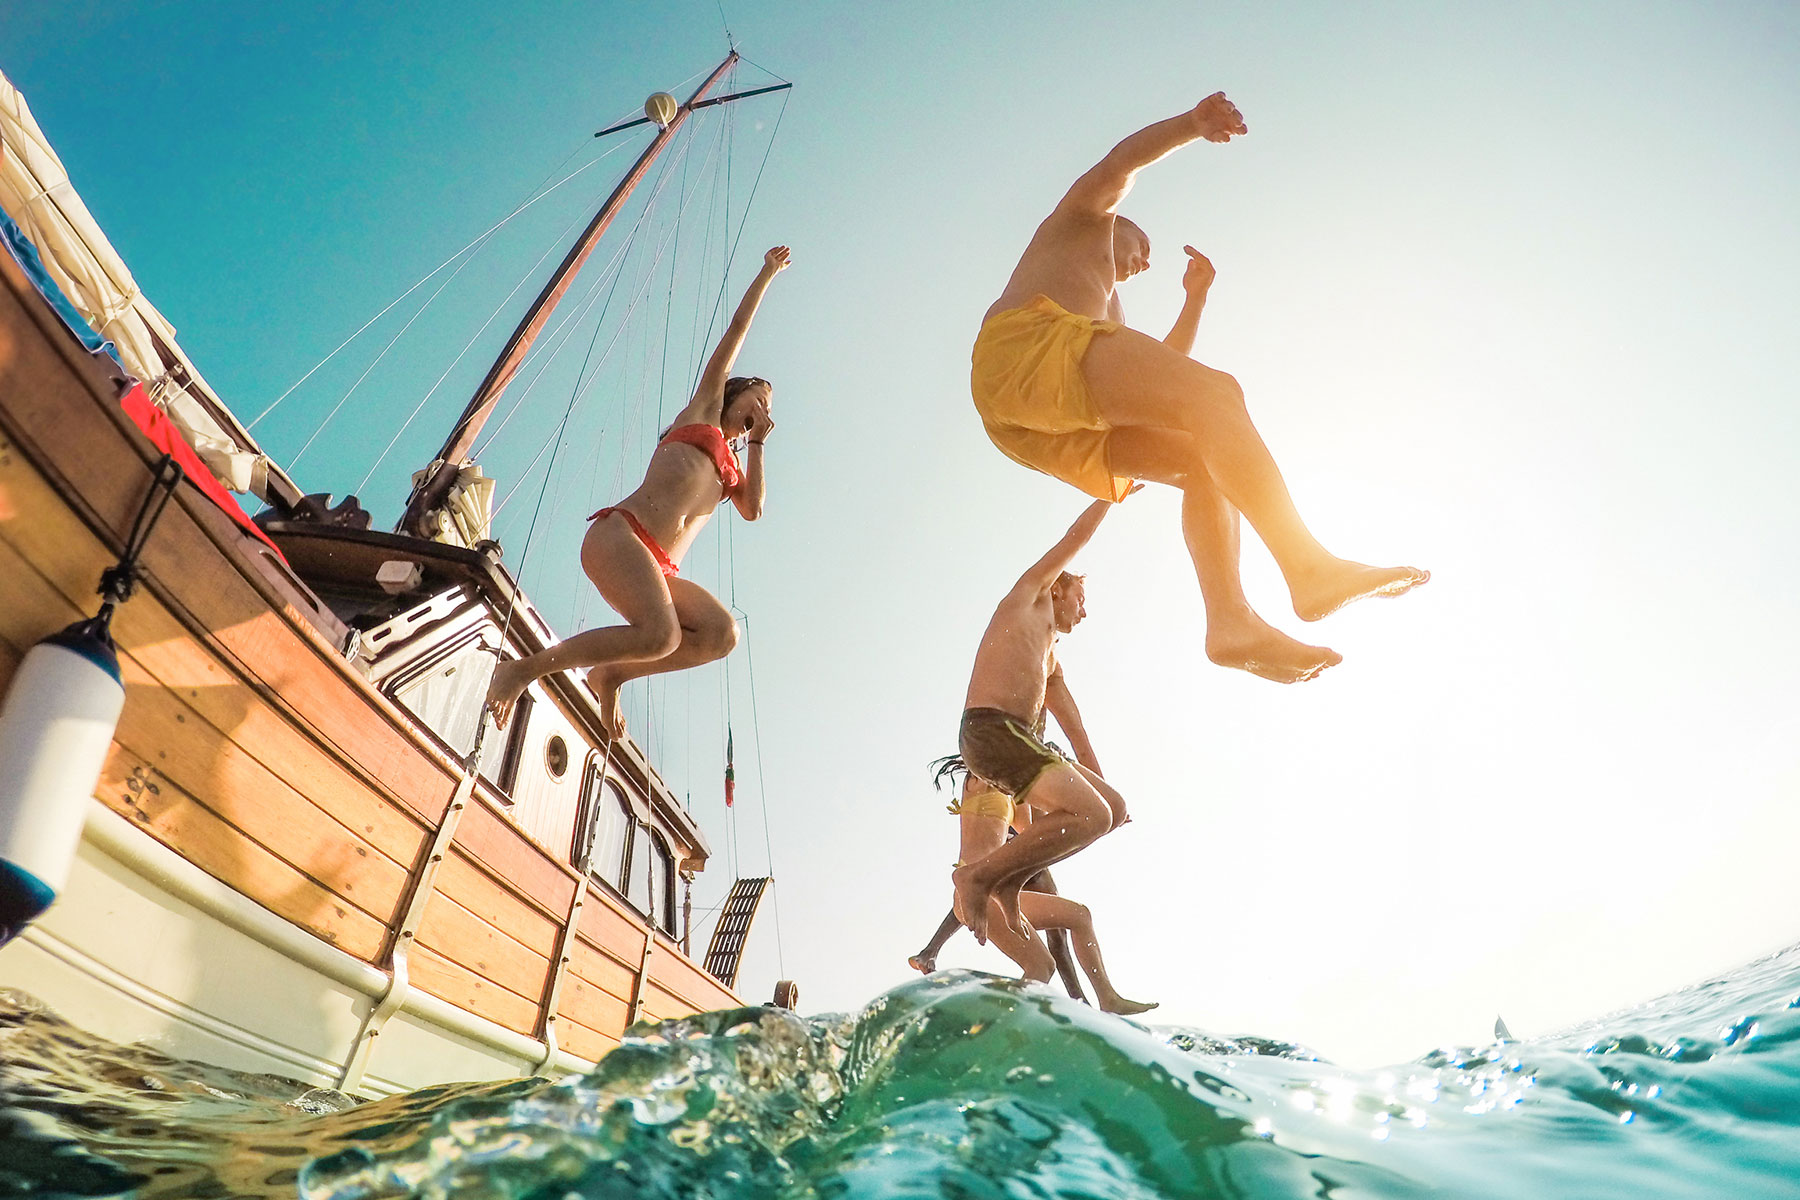 Group of friends jumping off a nice wooden boat into the open sea